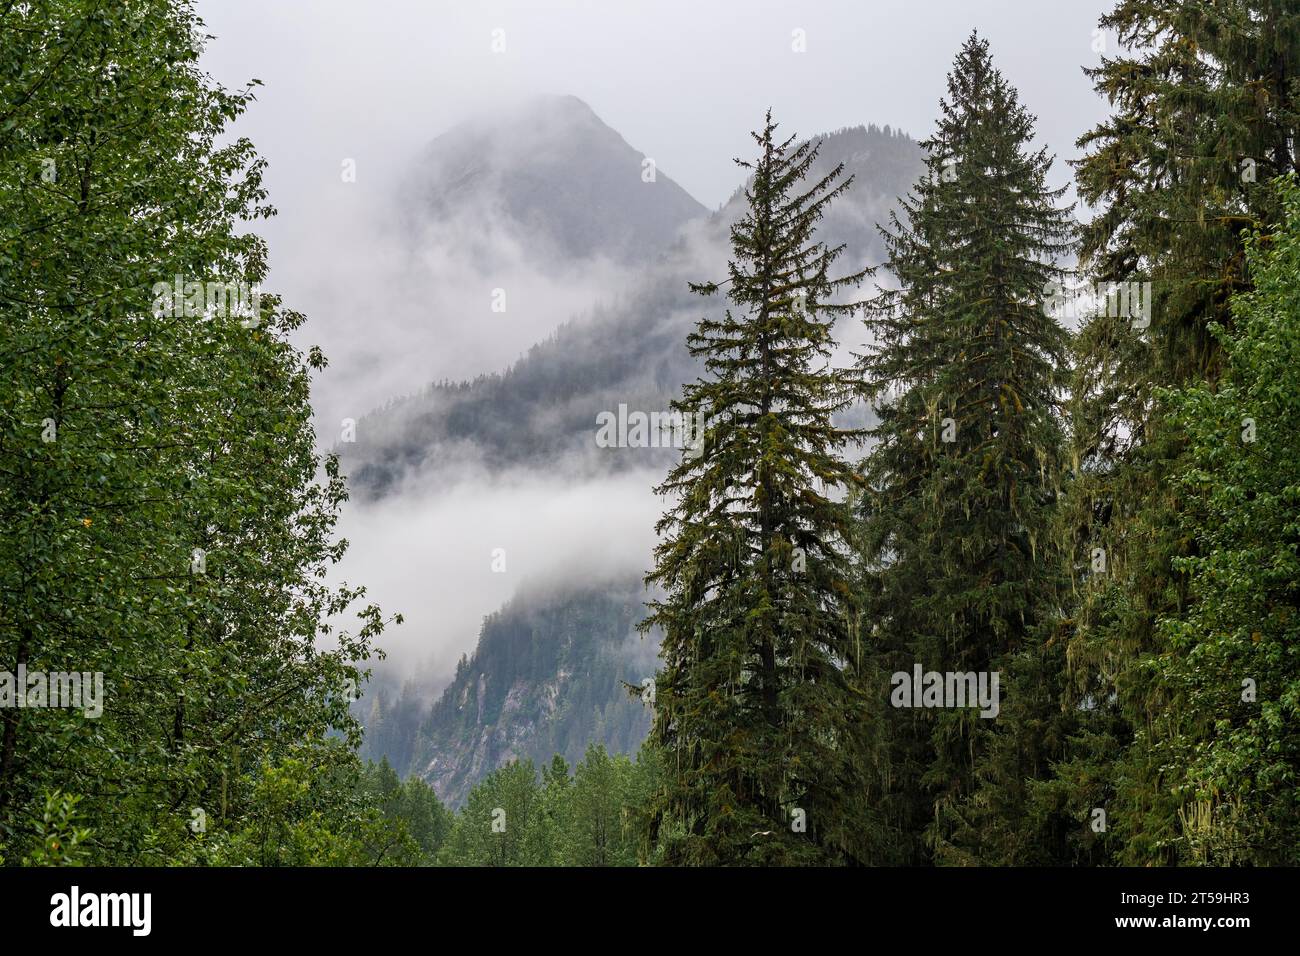 Misty landscape with pine trees in Tongass national forest, Misty Fjords national monument, Alaska, USA. Stock Photo